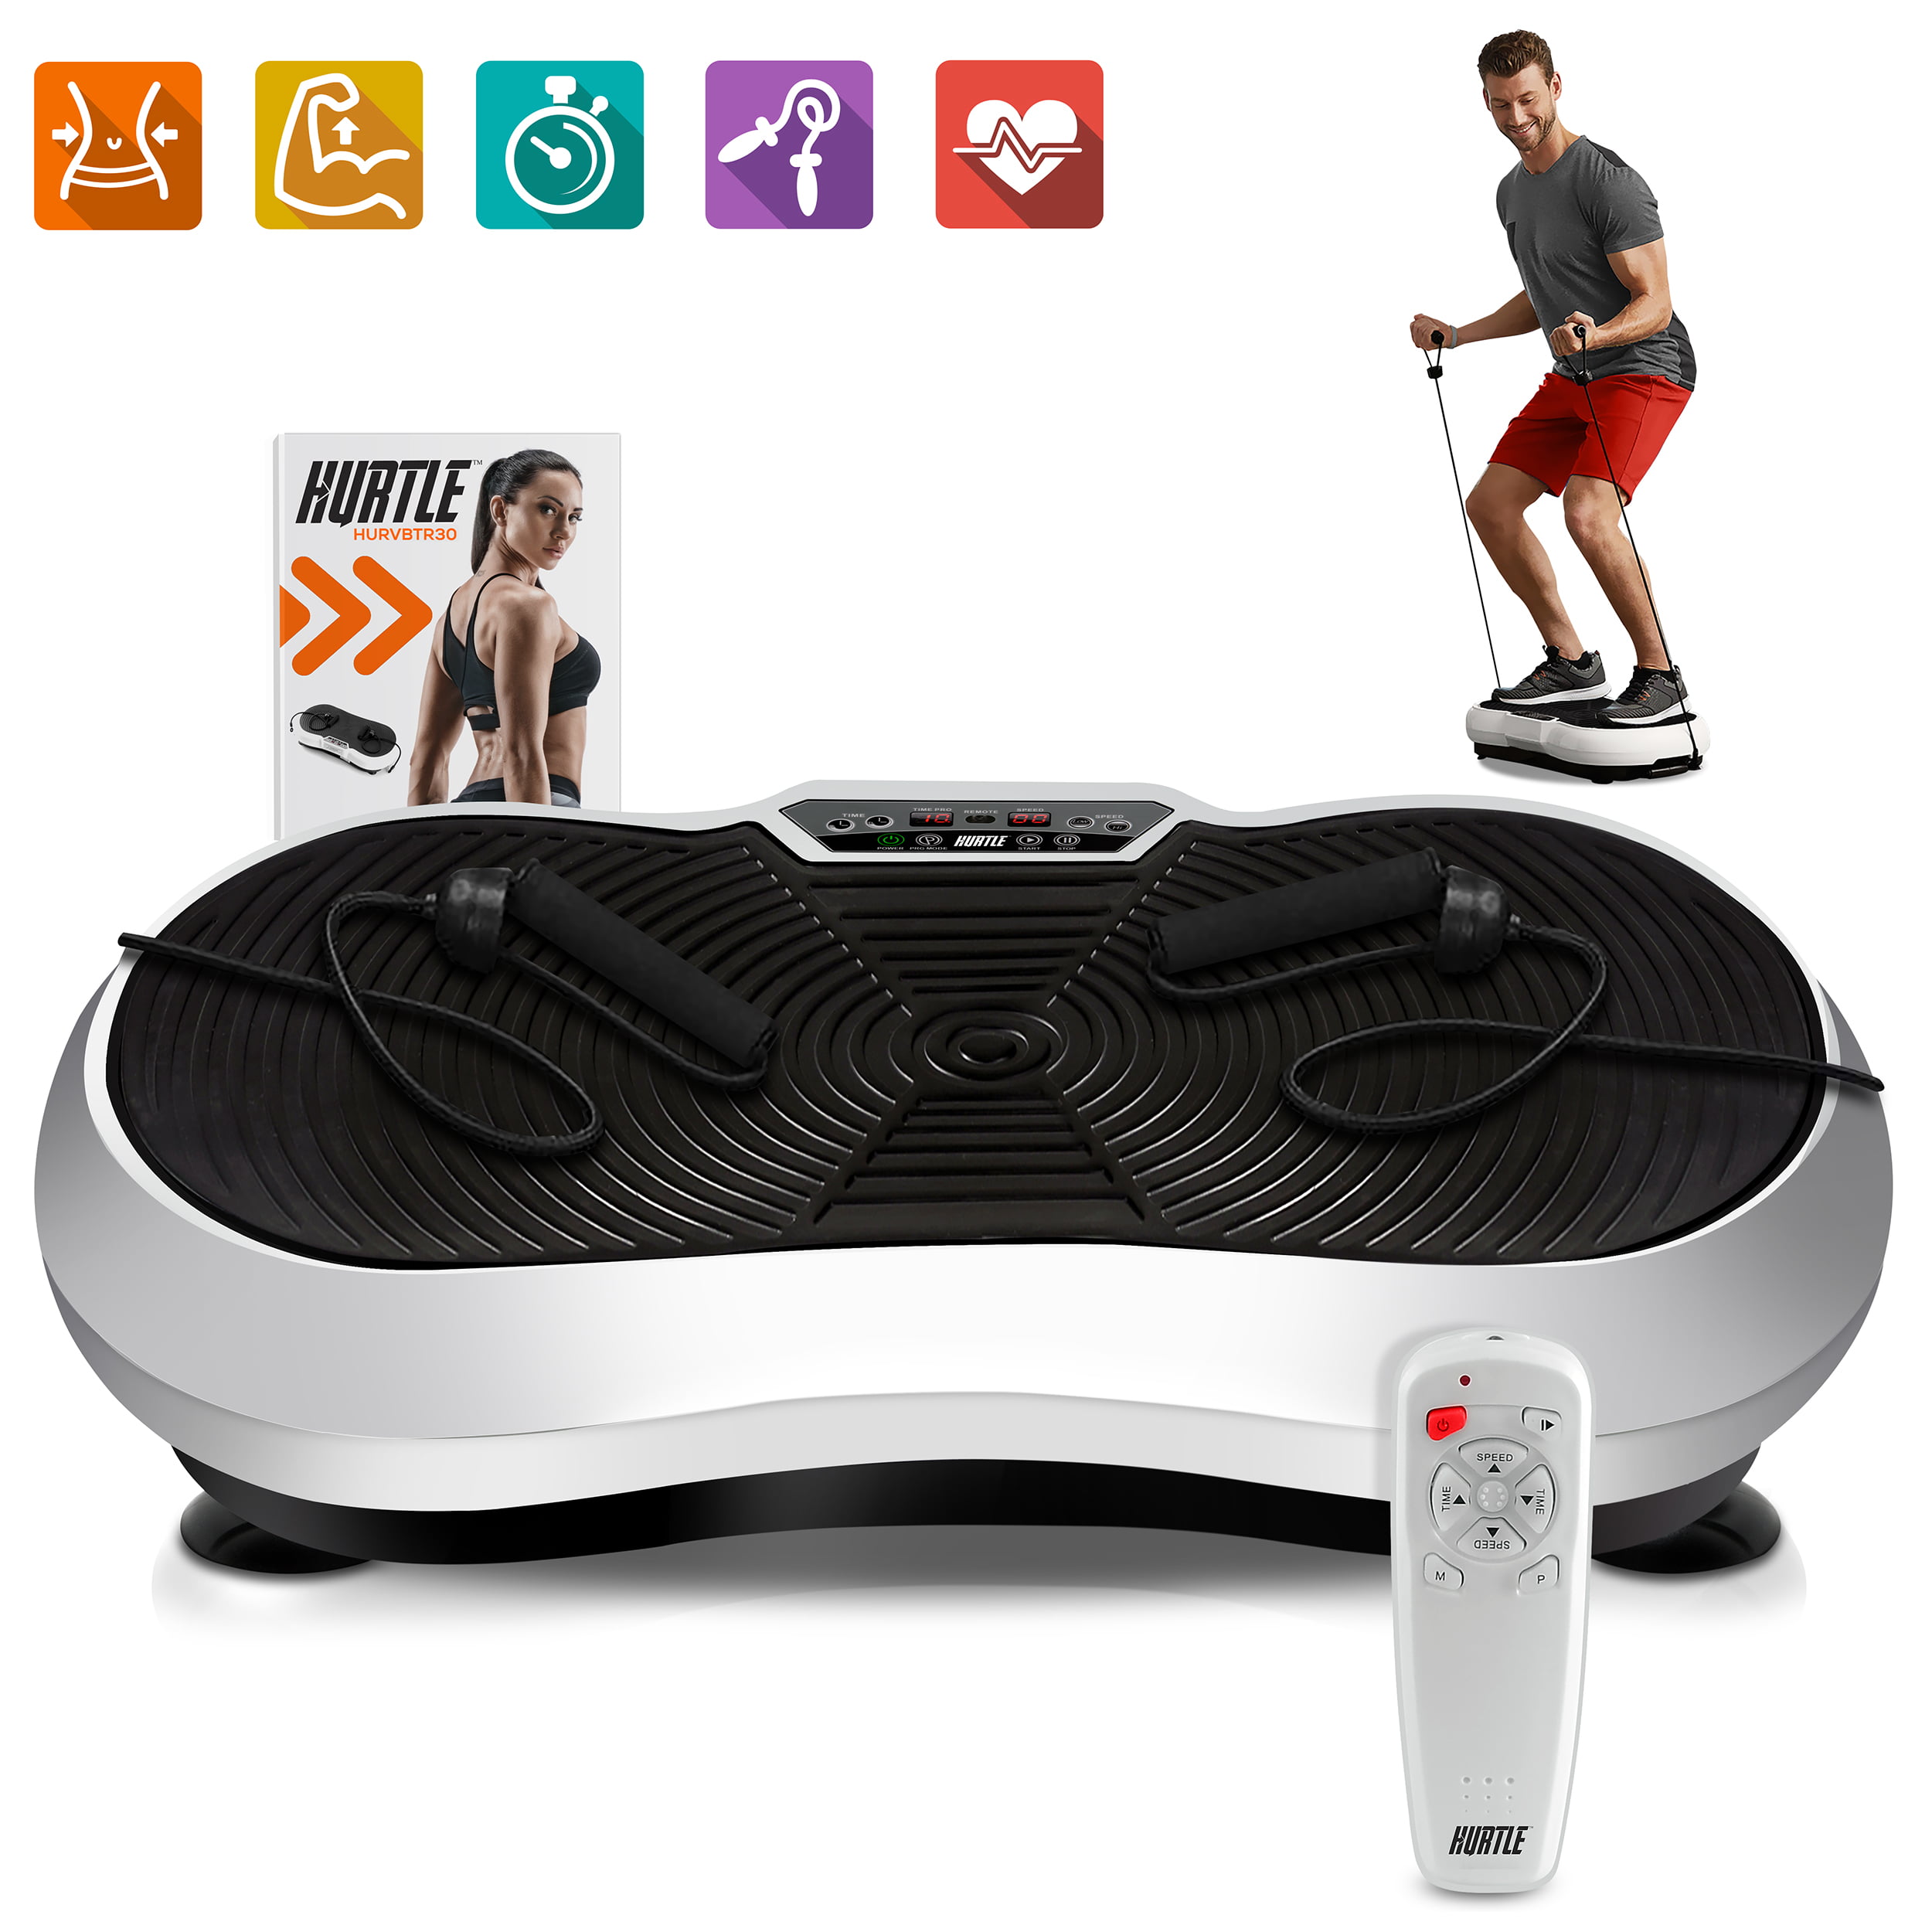 Details about   Weight Losing Fitness Massage Yoga Exercise Machine Vibration Plate Platform 